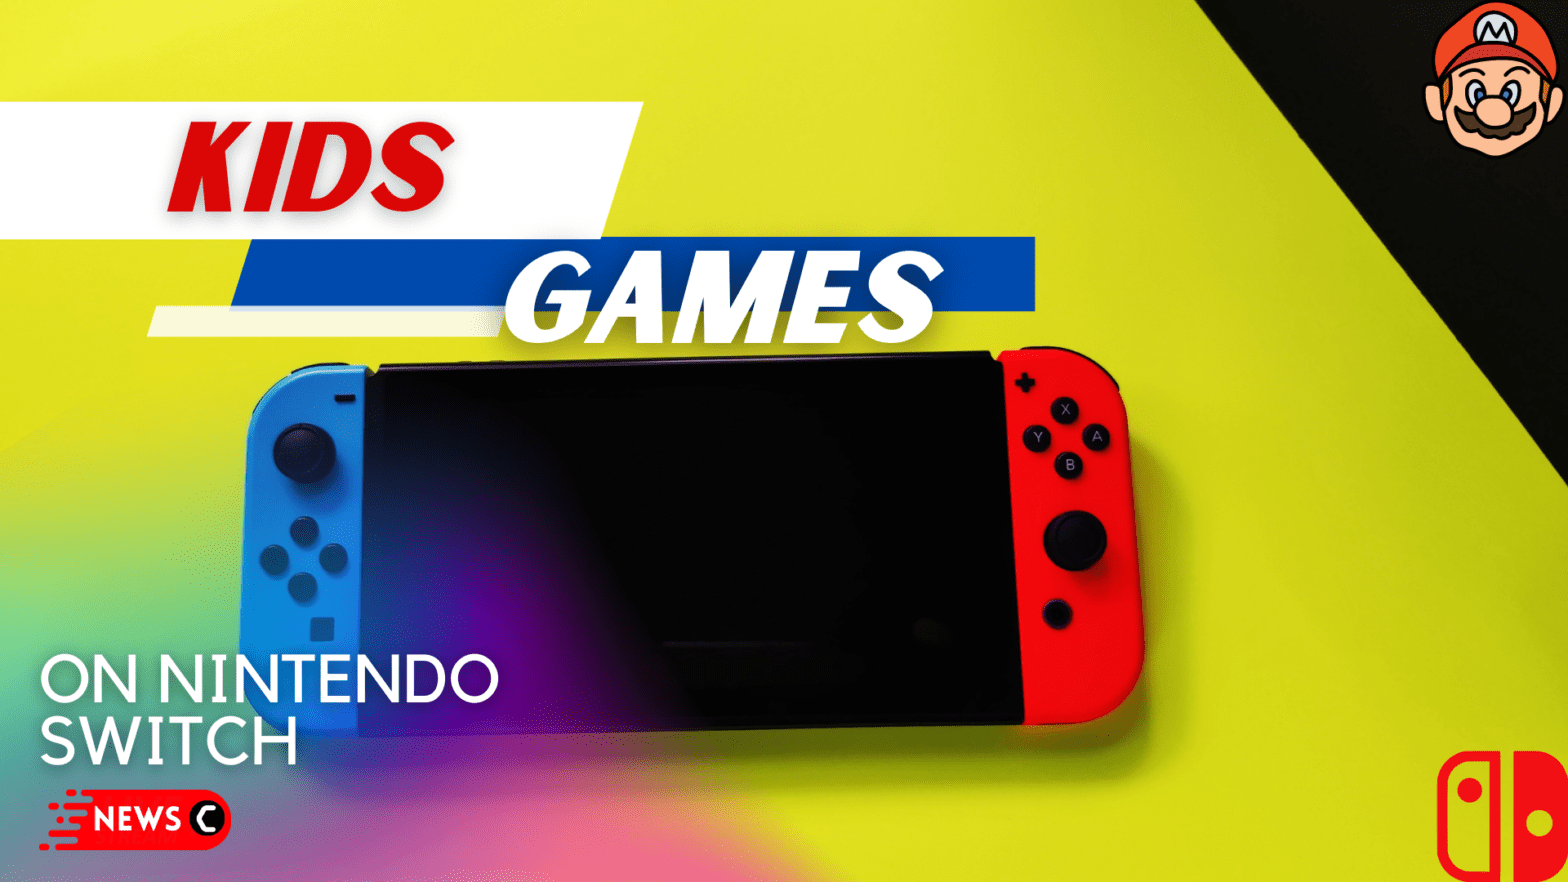 Nintendo Switch Games For Kids